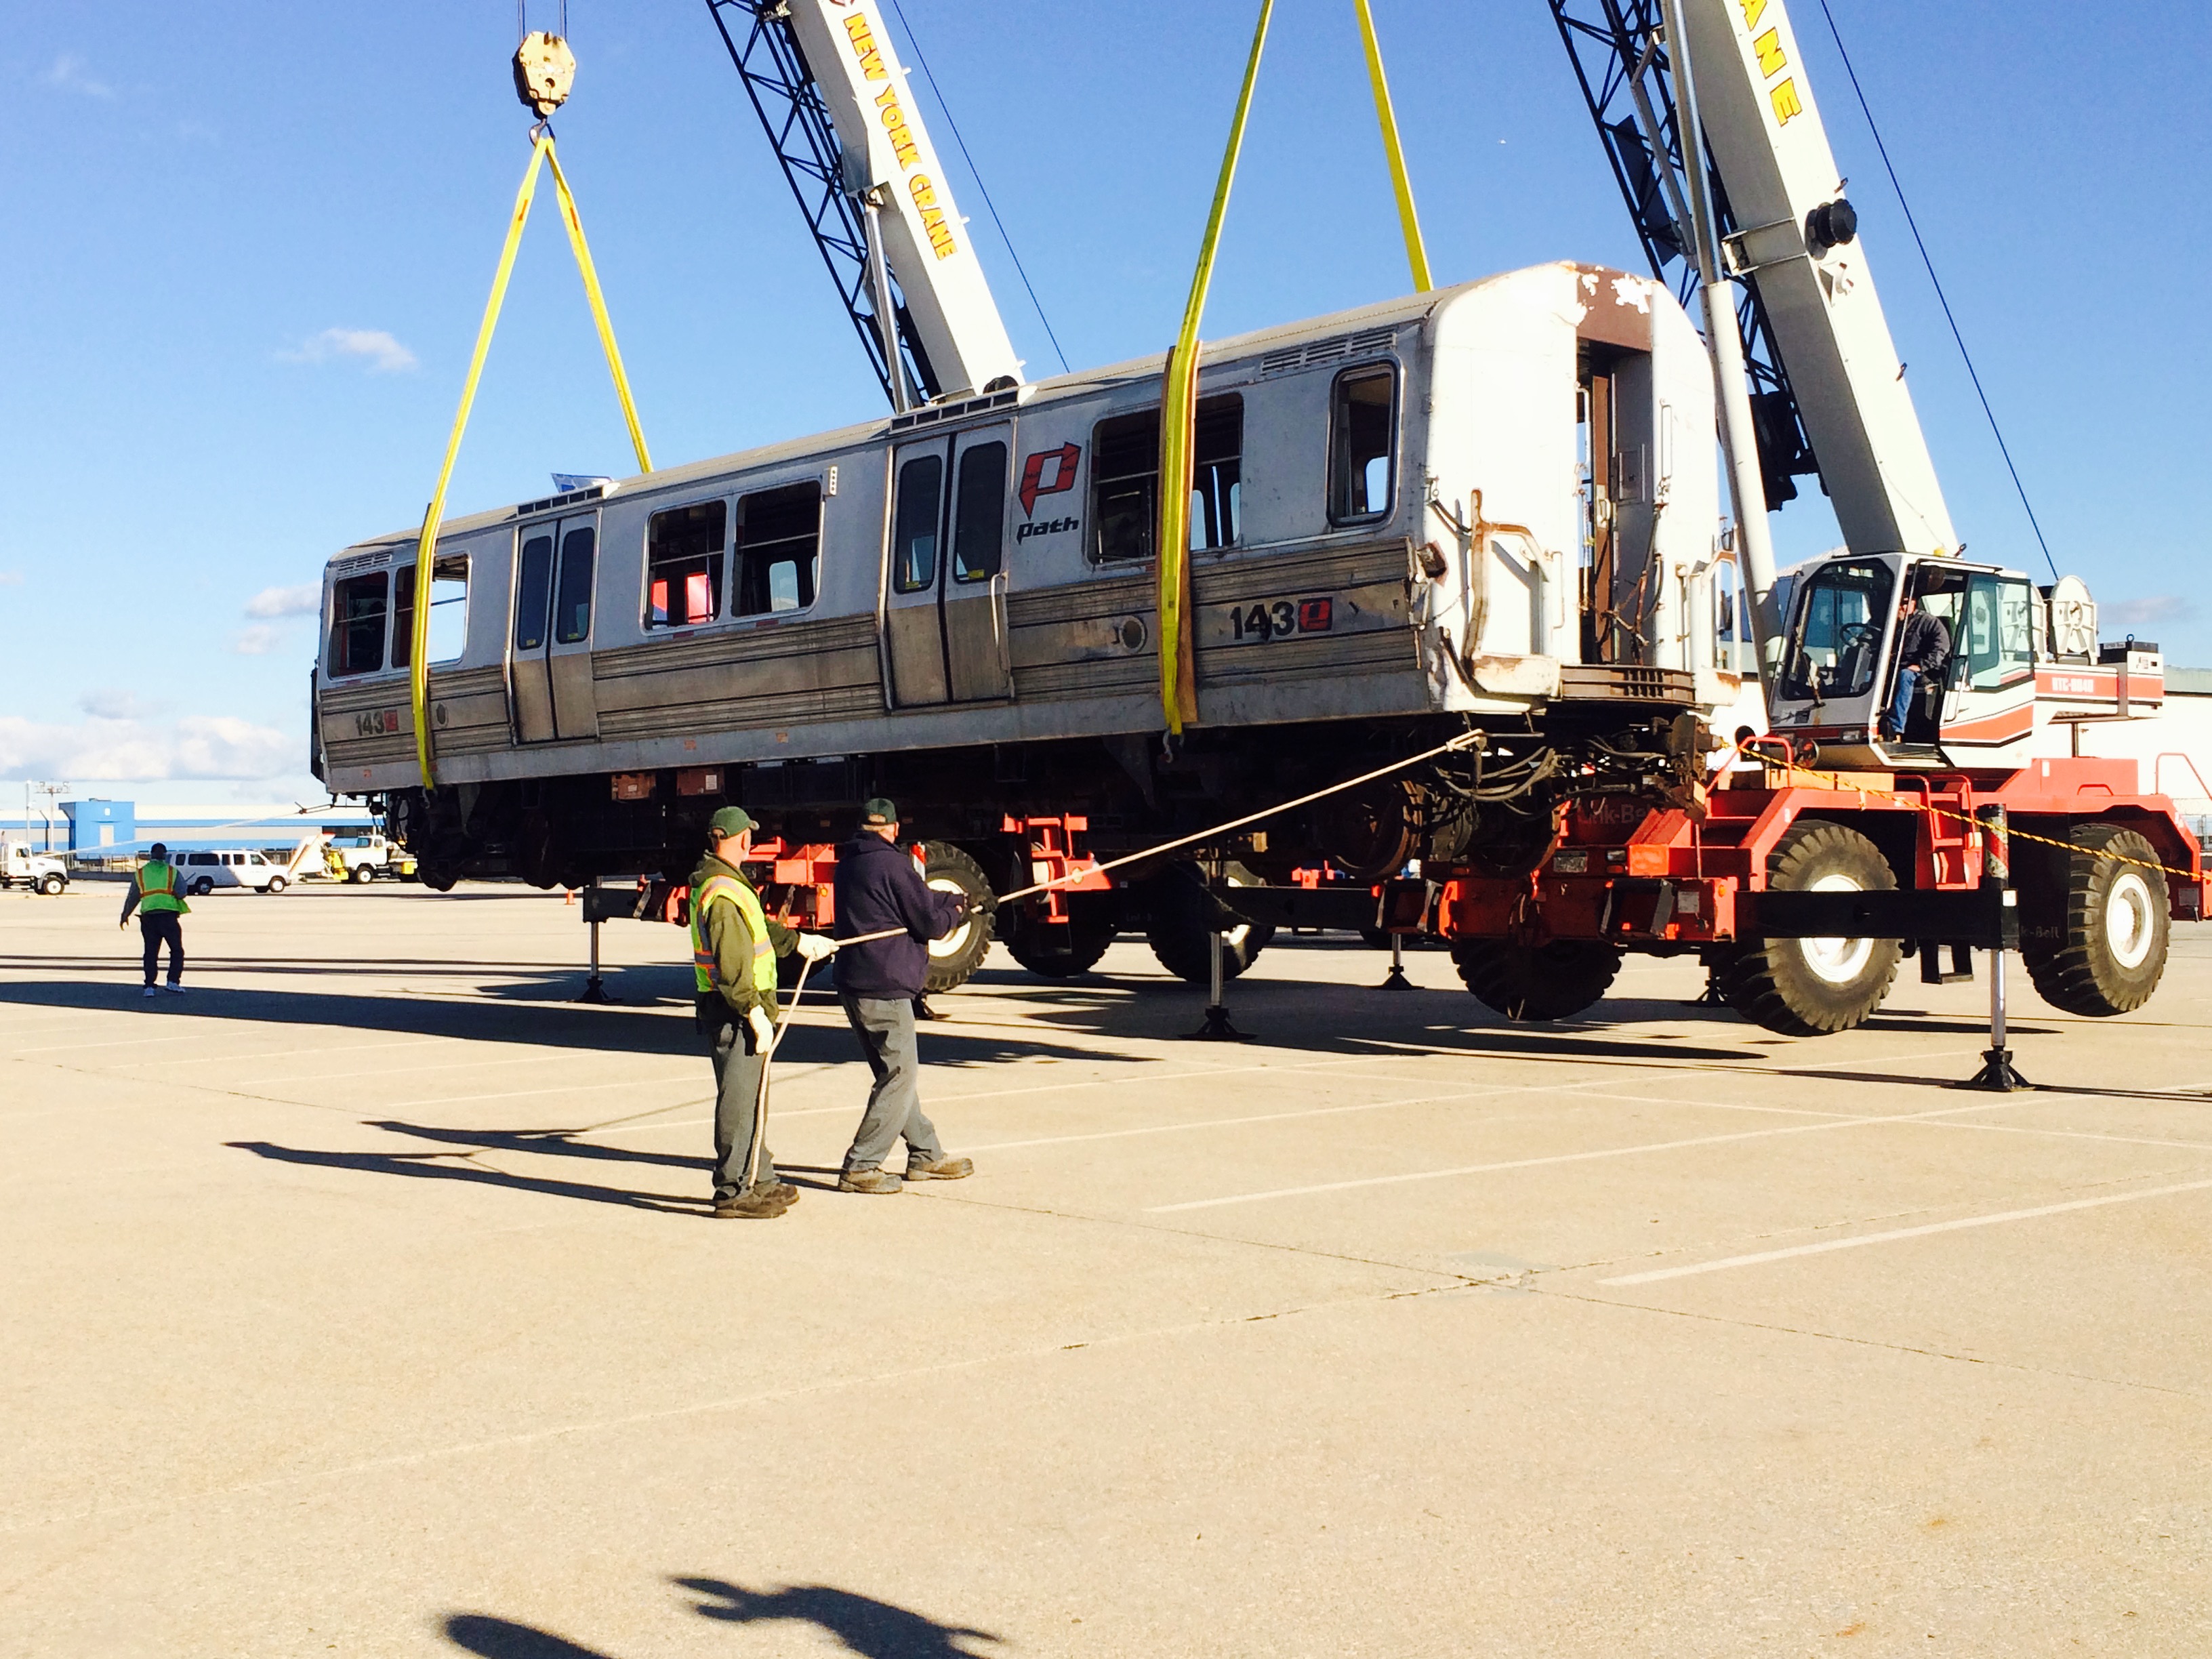 Crews load PATH train car number 143 onto a flatbed trailer outside Hangar 17 at John F. Kennedy International Airport.